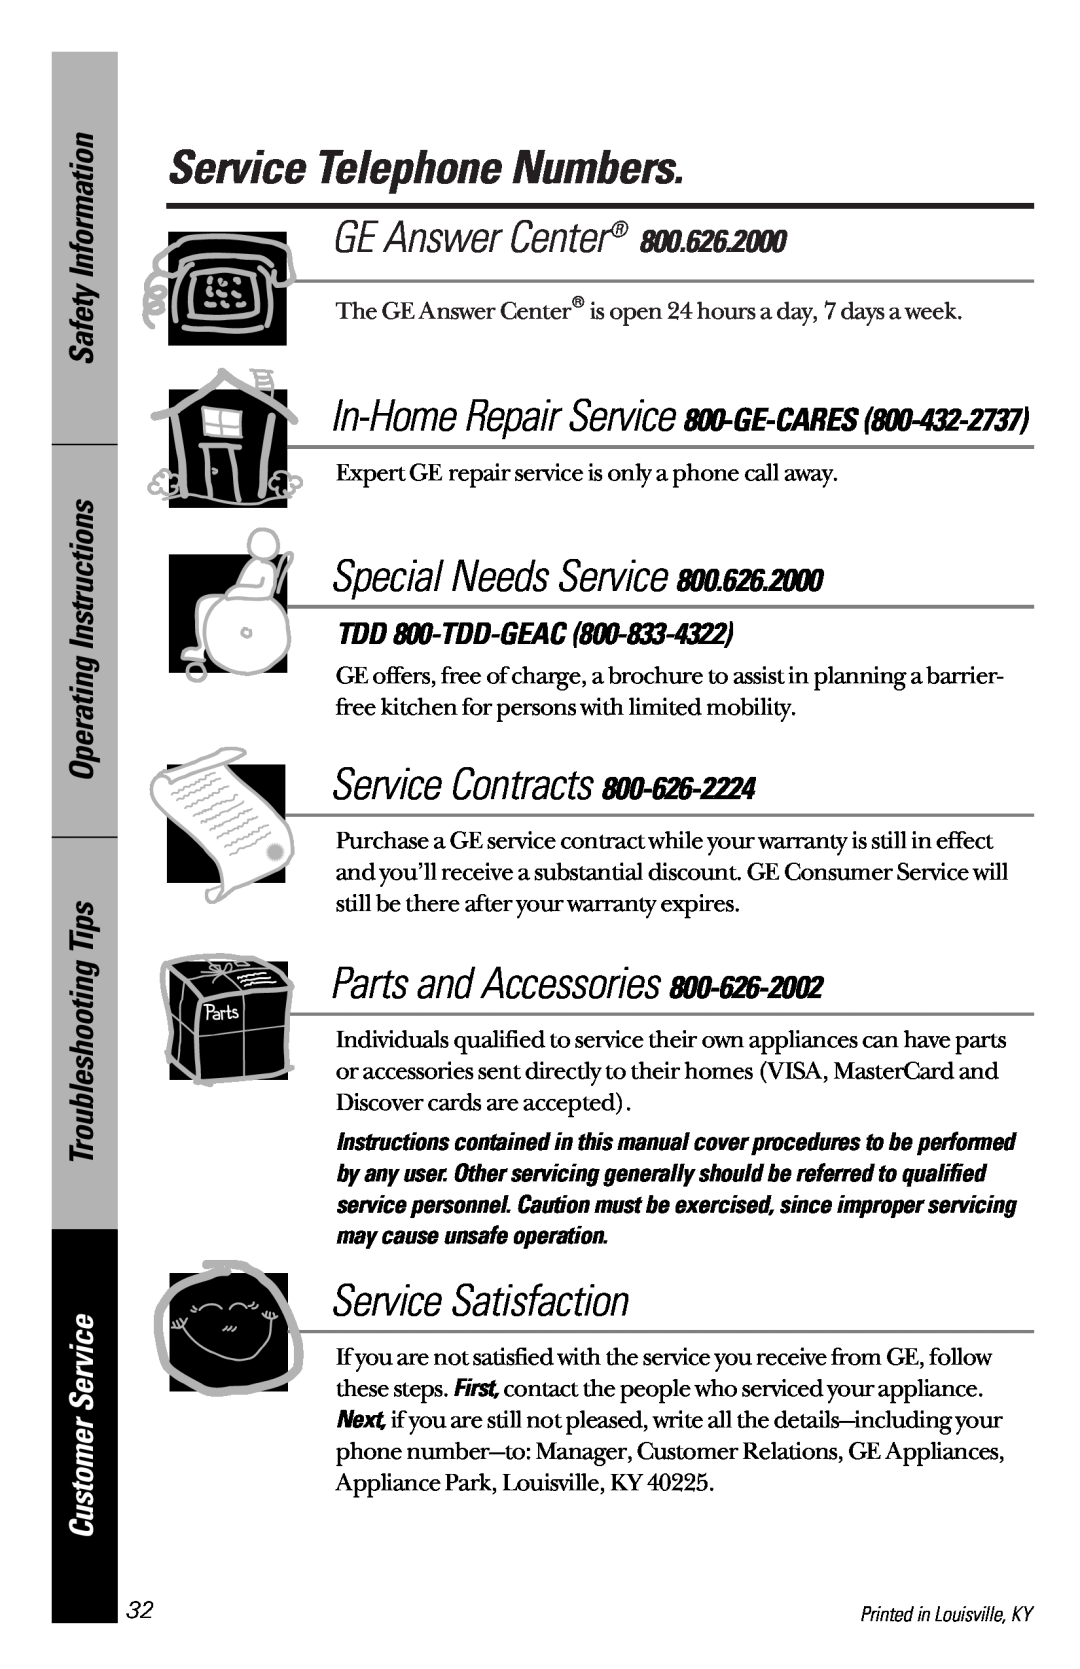 GE GSD4124, GSD4132 Service Telephone Numbers, Customer Service, In-Home Repair Service 800-GE-CARES, TDD 800-TDD-GEAC 